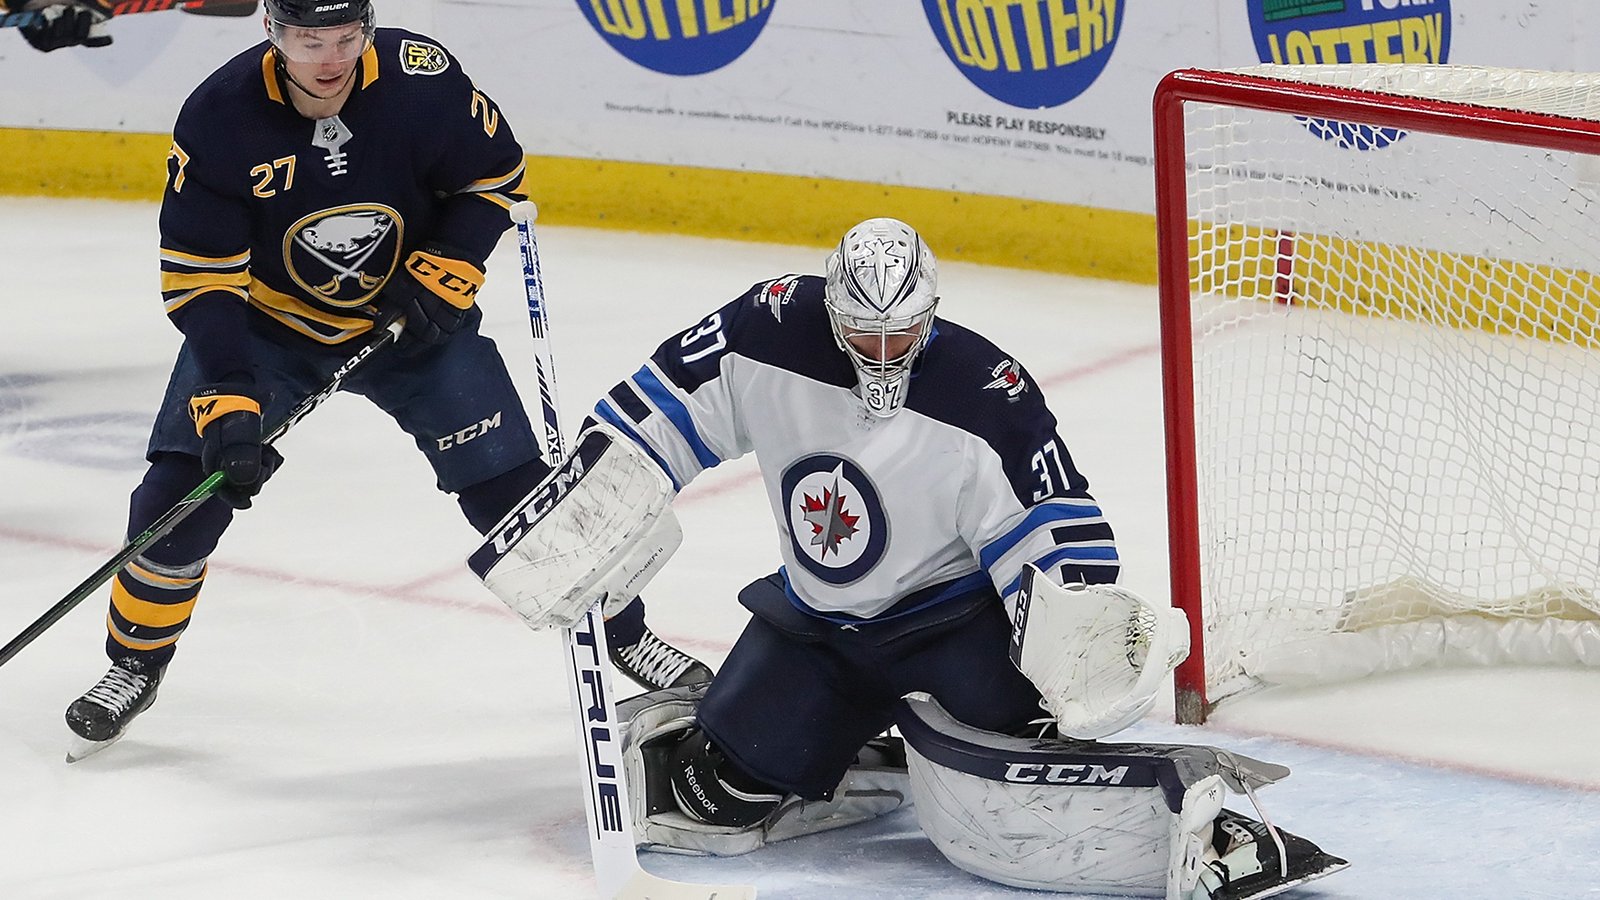  Connor Hellebuyck has sights set on bigger things than the Vezina Trophy